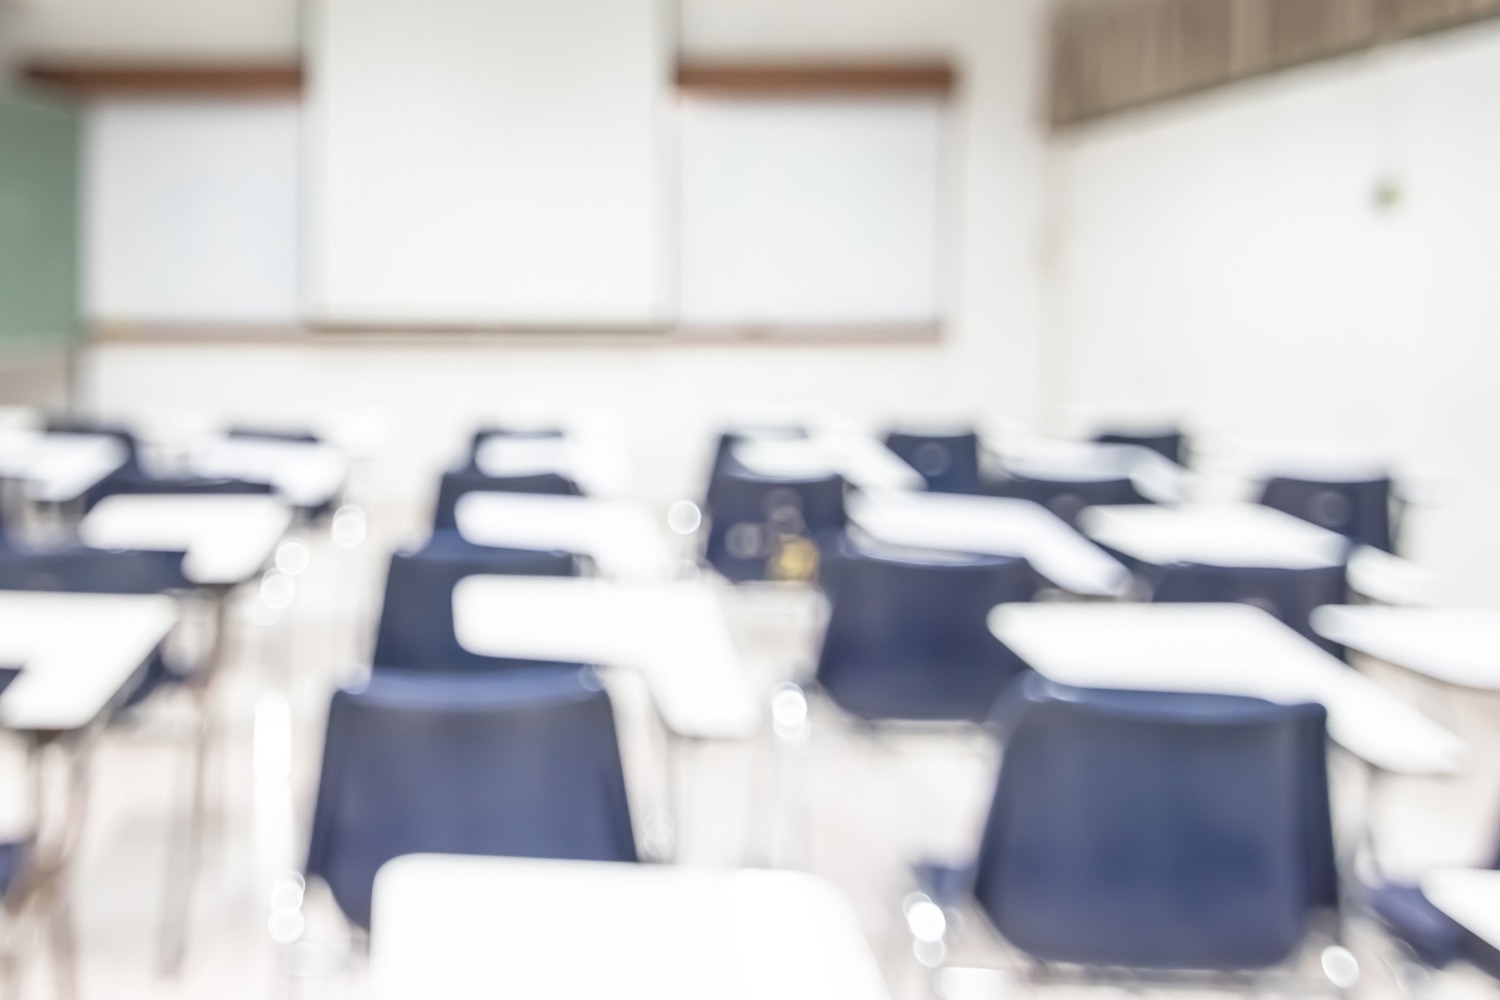 Blur classroom education background empty school class lecture room  interior view with no teacher nor student - Public Service Association